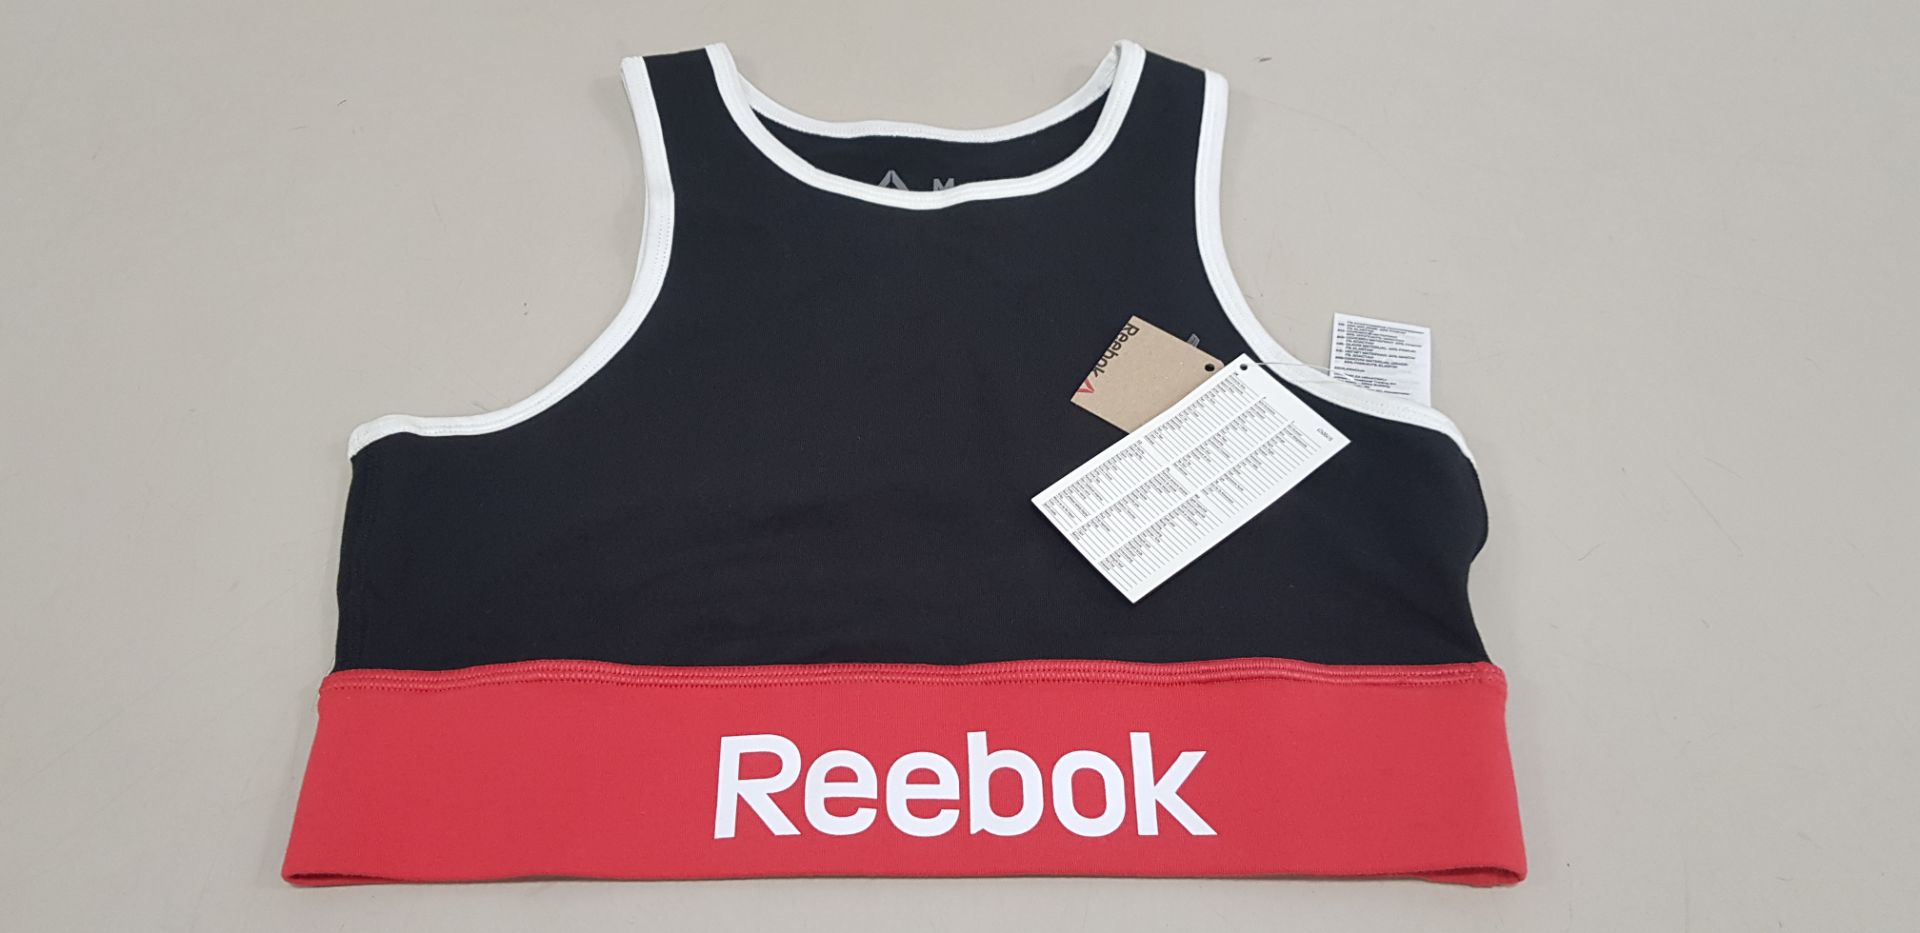 20 X BRAND NEW REEBOK LINEAR LOGO COTTON BRA IN RED AND BLACK (SIZE M) - PICK LOOSE